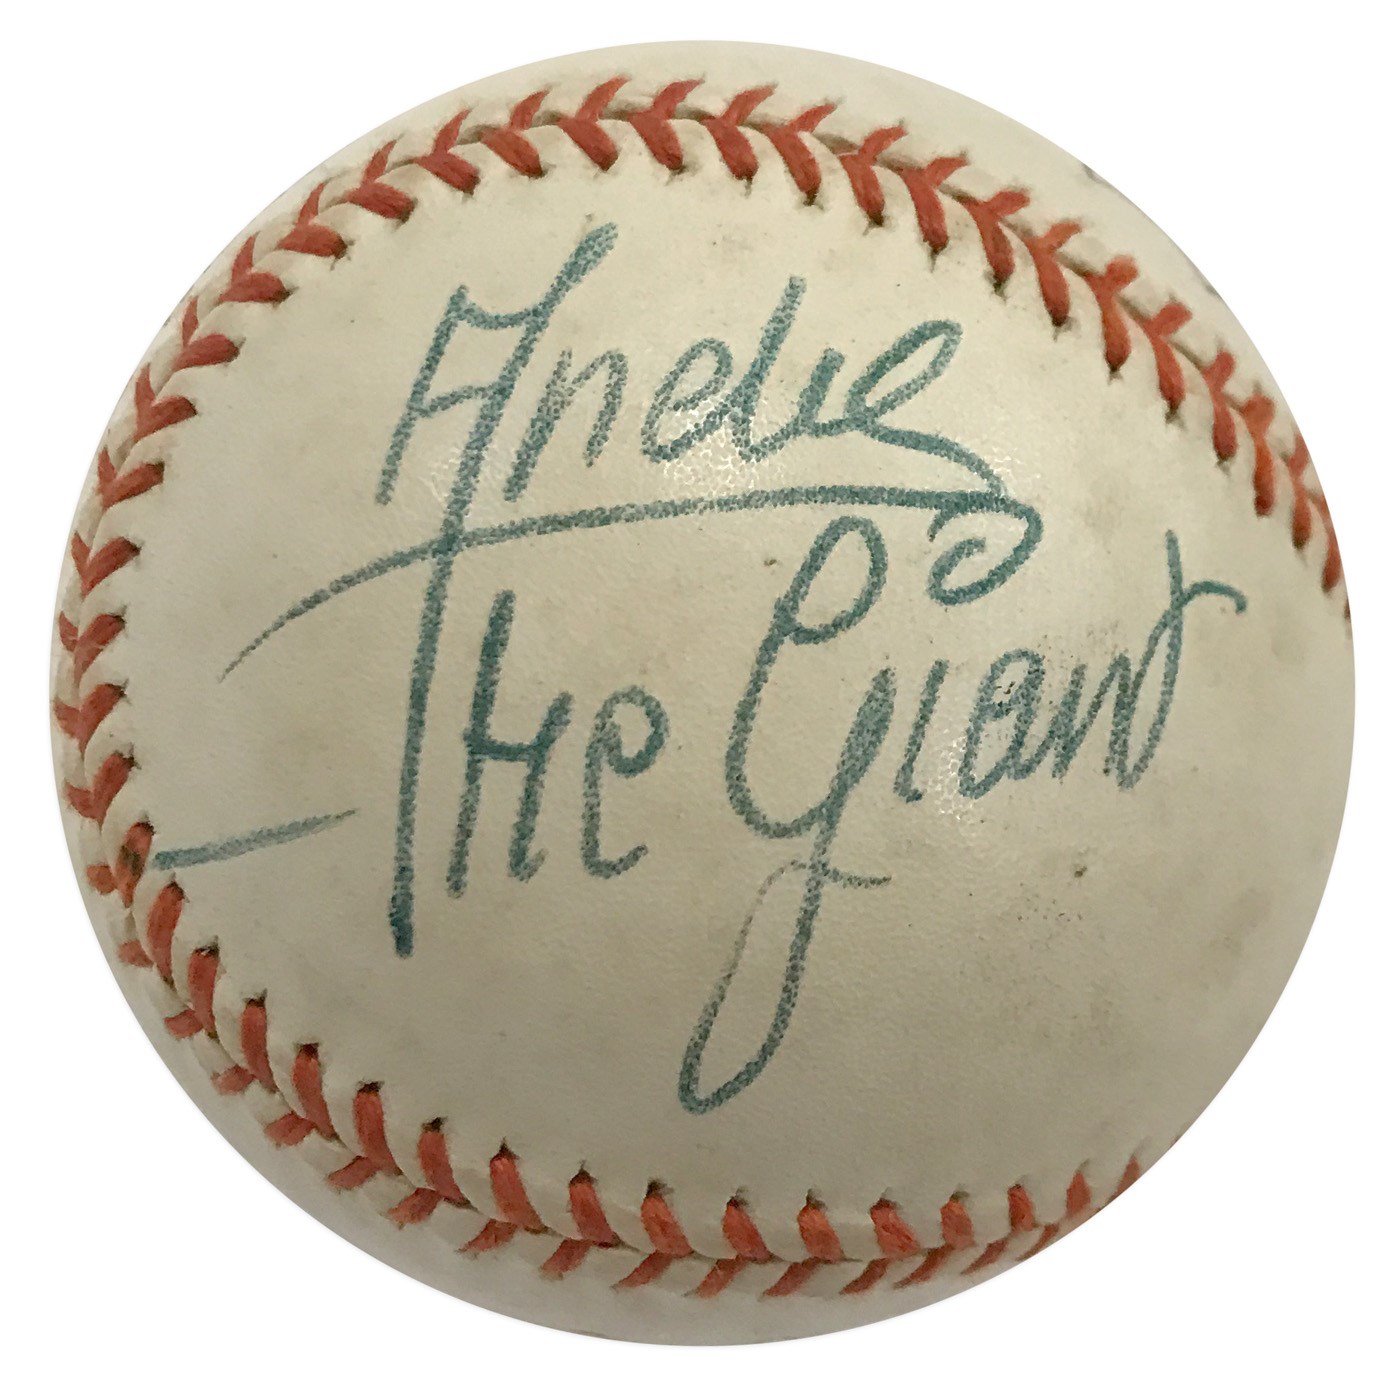 Baseball Autographs - The Only Known Andre the Giant Single-Signed Baseball